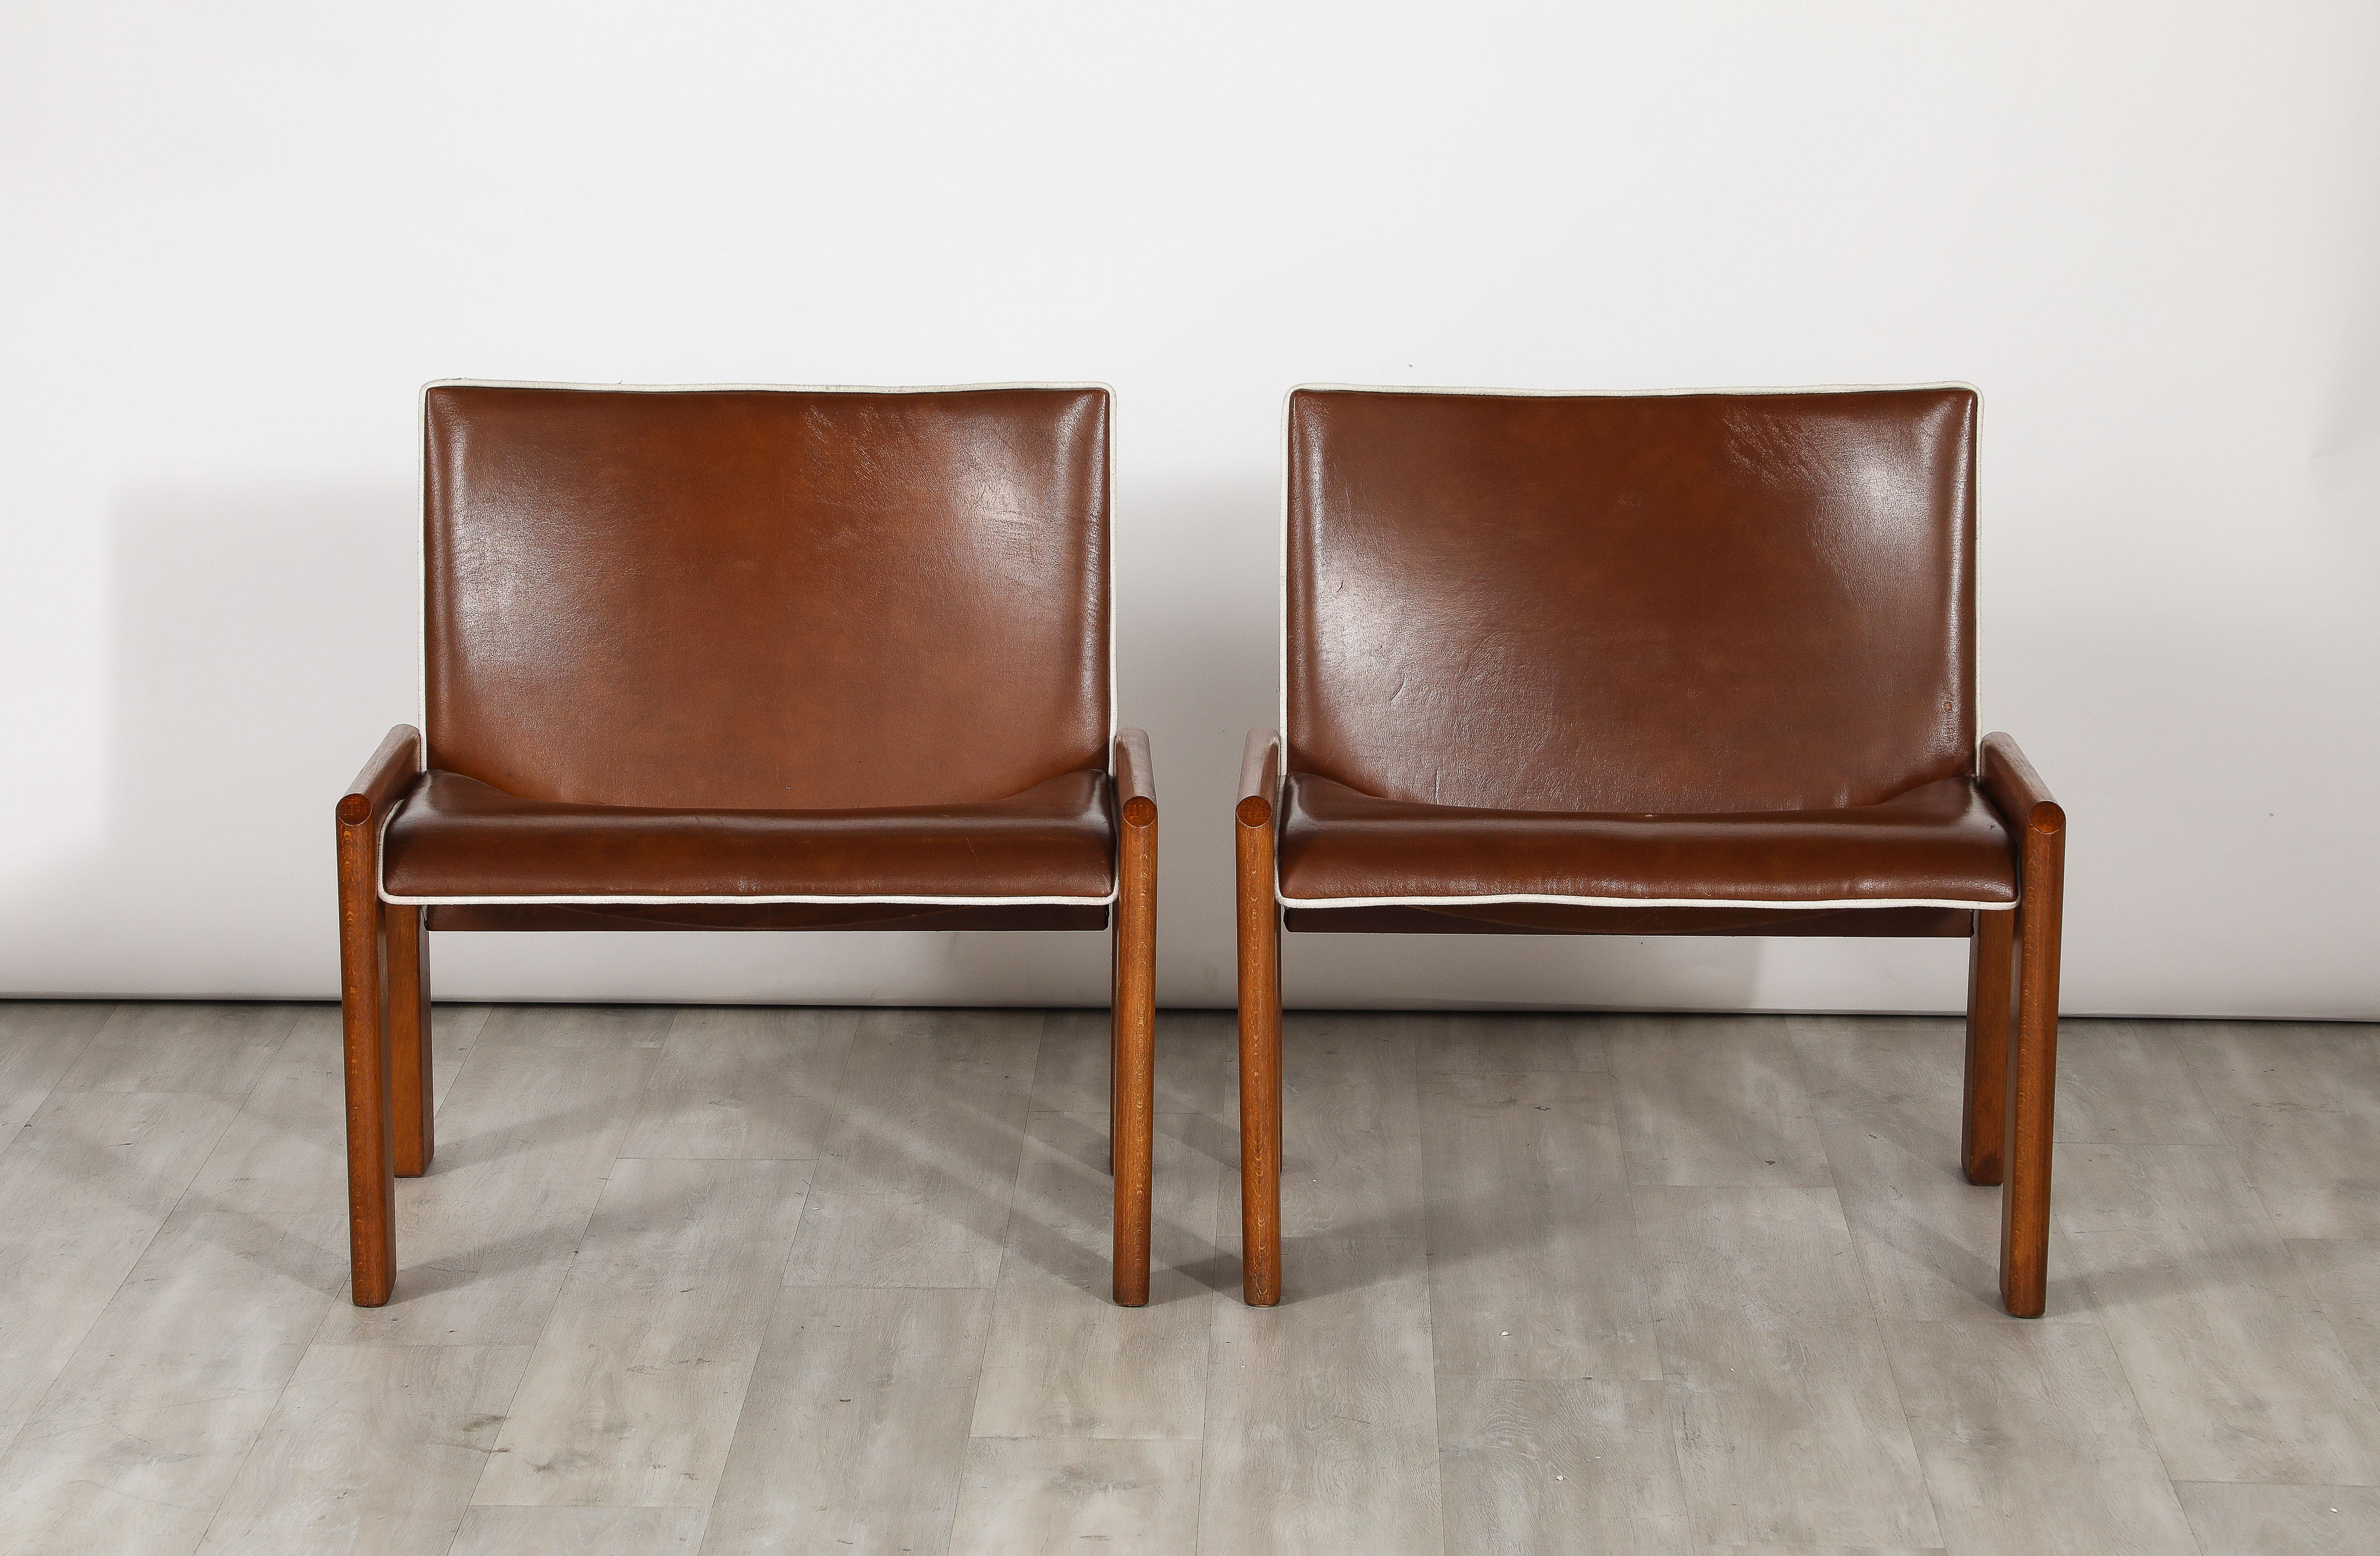 Pair of Leather Side Chairs by B&T Salotti, Italy, circa 1970 For Sale 9